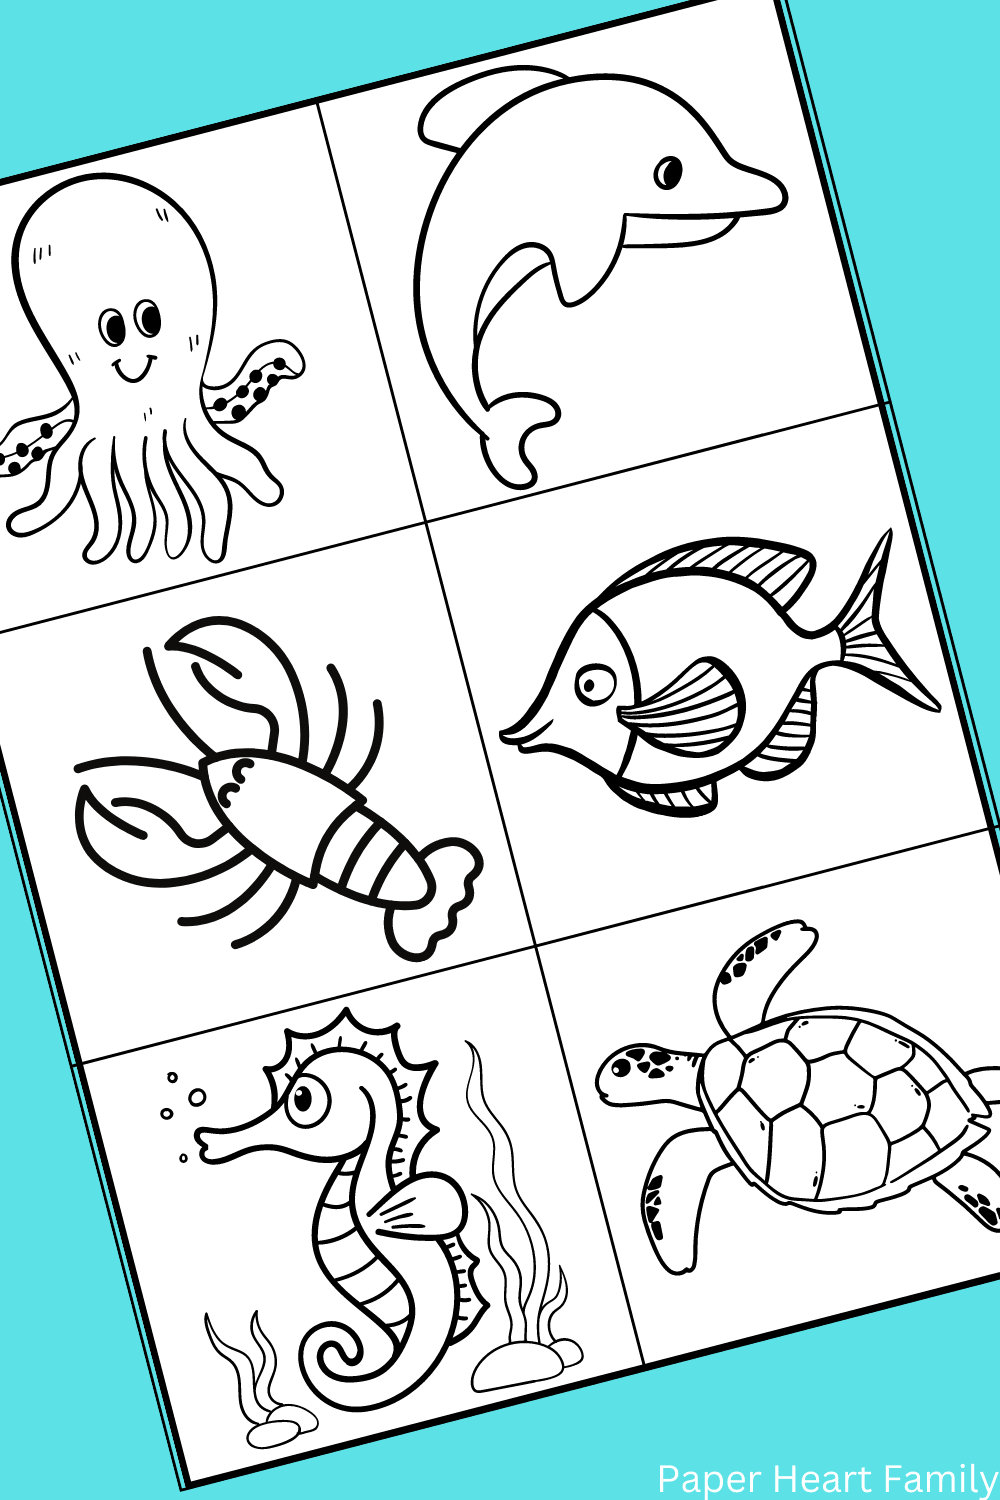 Easy Drawing Ideas For Kids